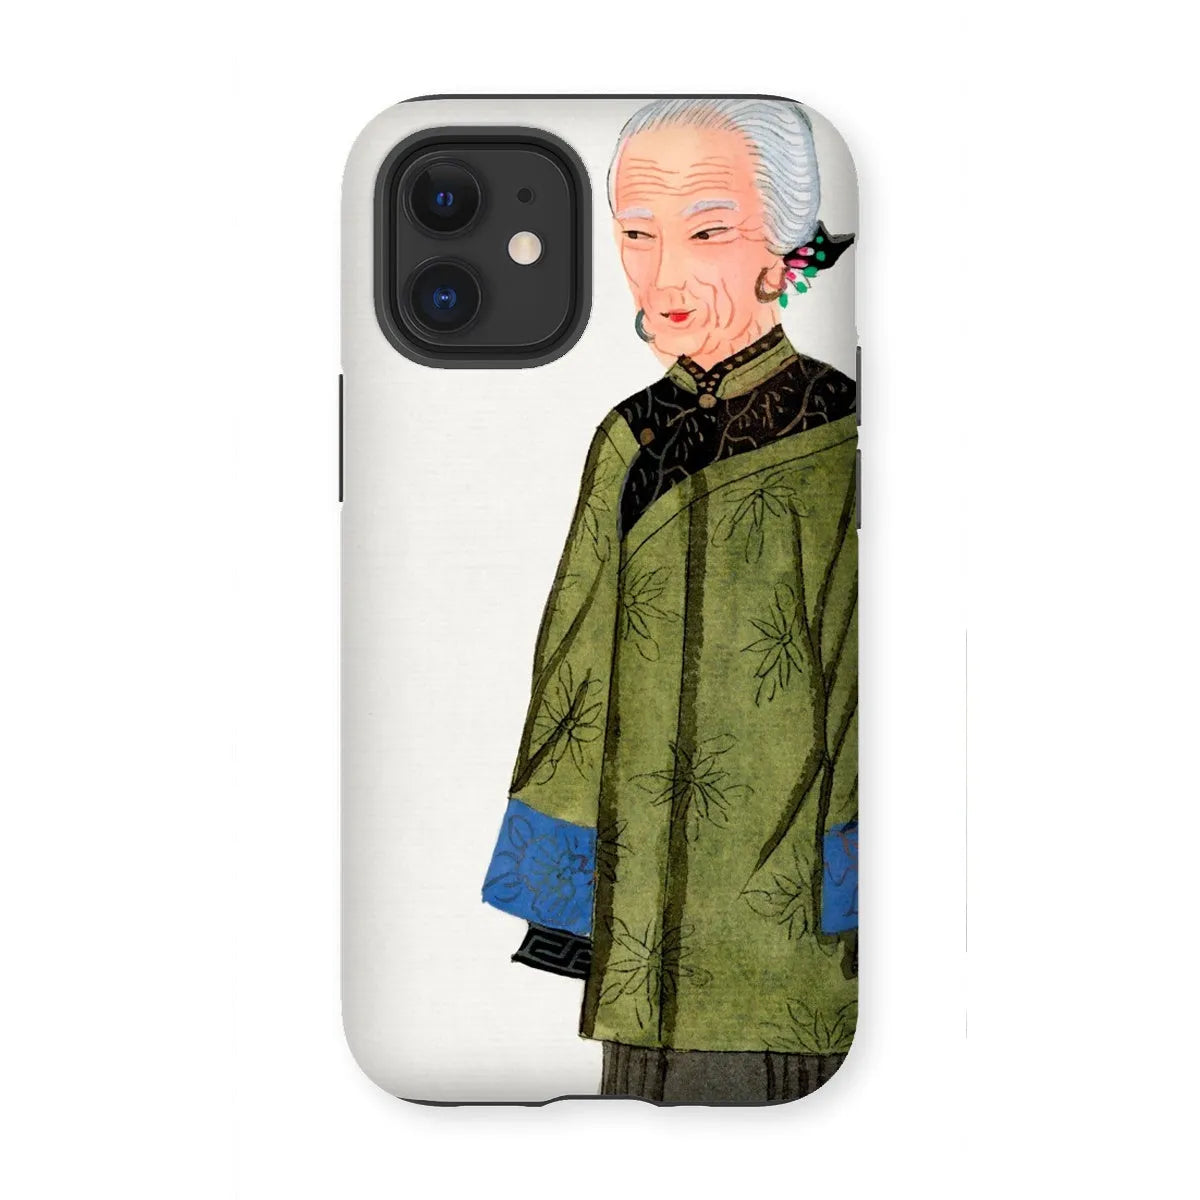 Grand Dame - Qing Chinese Aesthetic Art Phone Case - Iphone 12 Mini / Matte - Mobile Phone Cases - Aesthetic Art